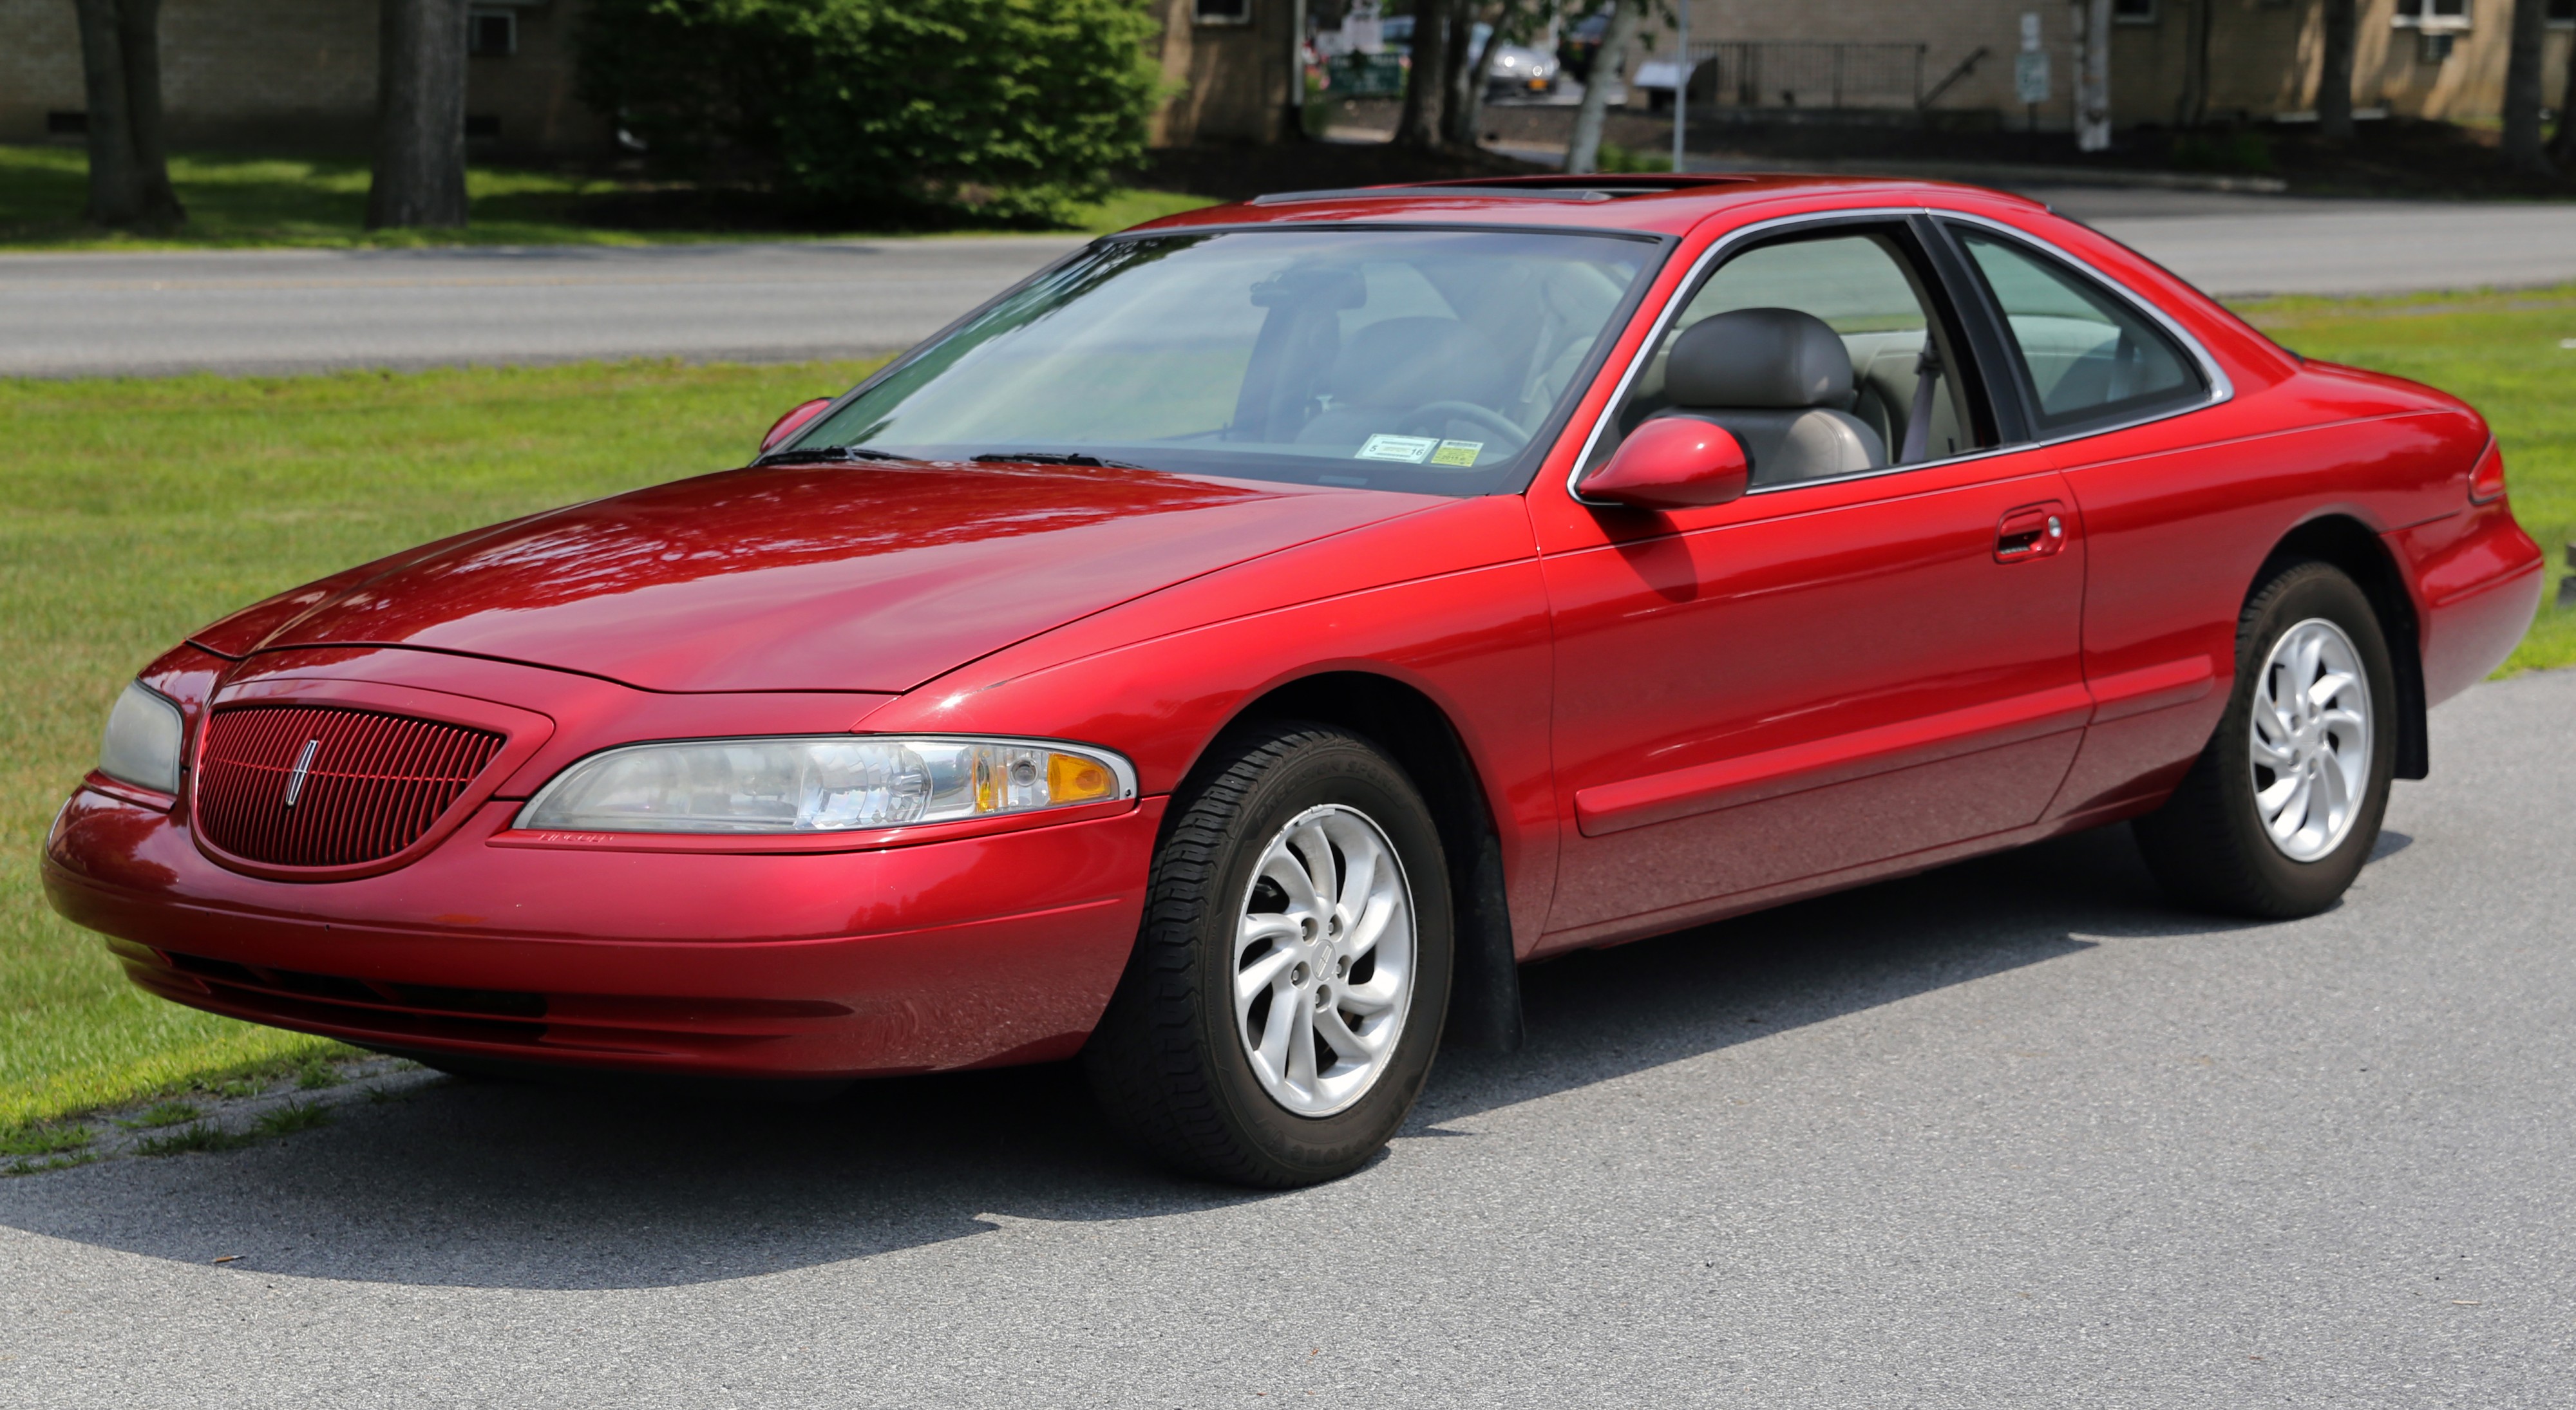 1998 Lincoln Mark VIII LSC in red, front left